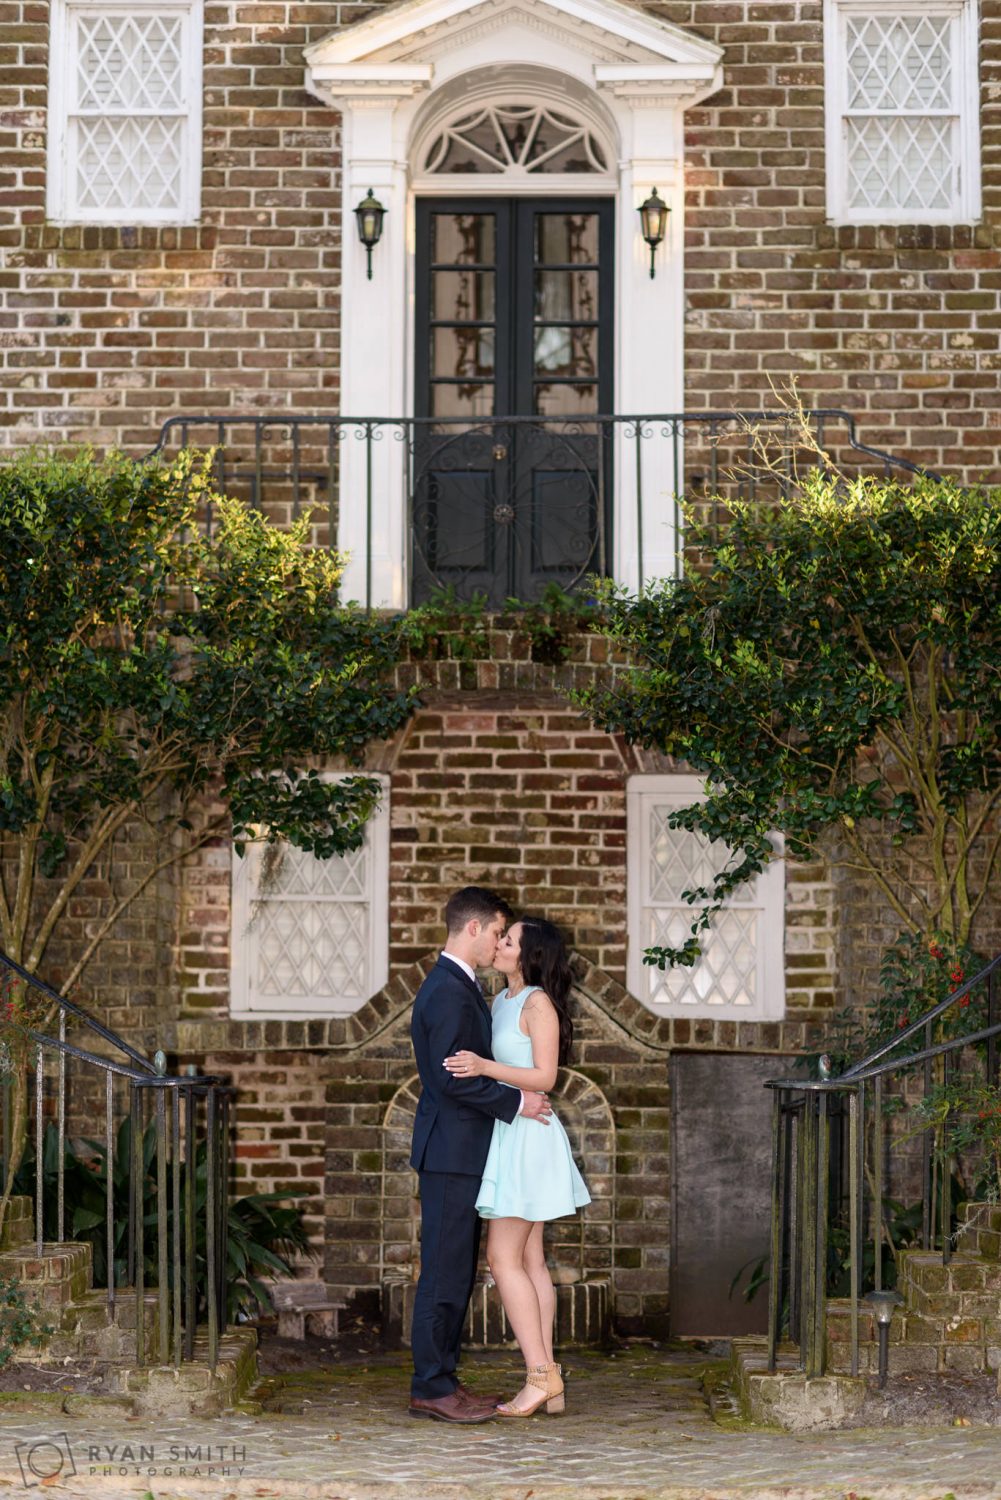 Kiss in front of the house Mansfield Plantation, Georgetown